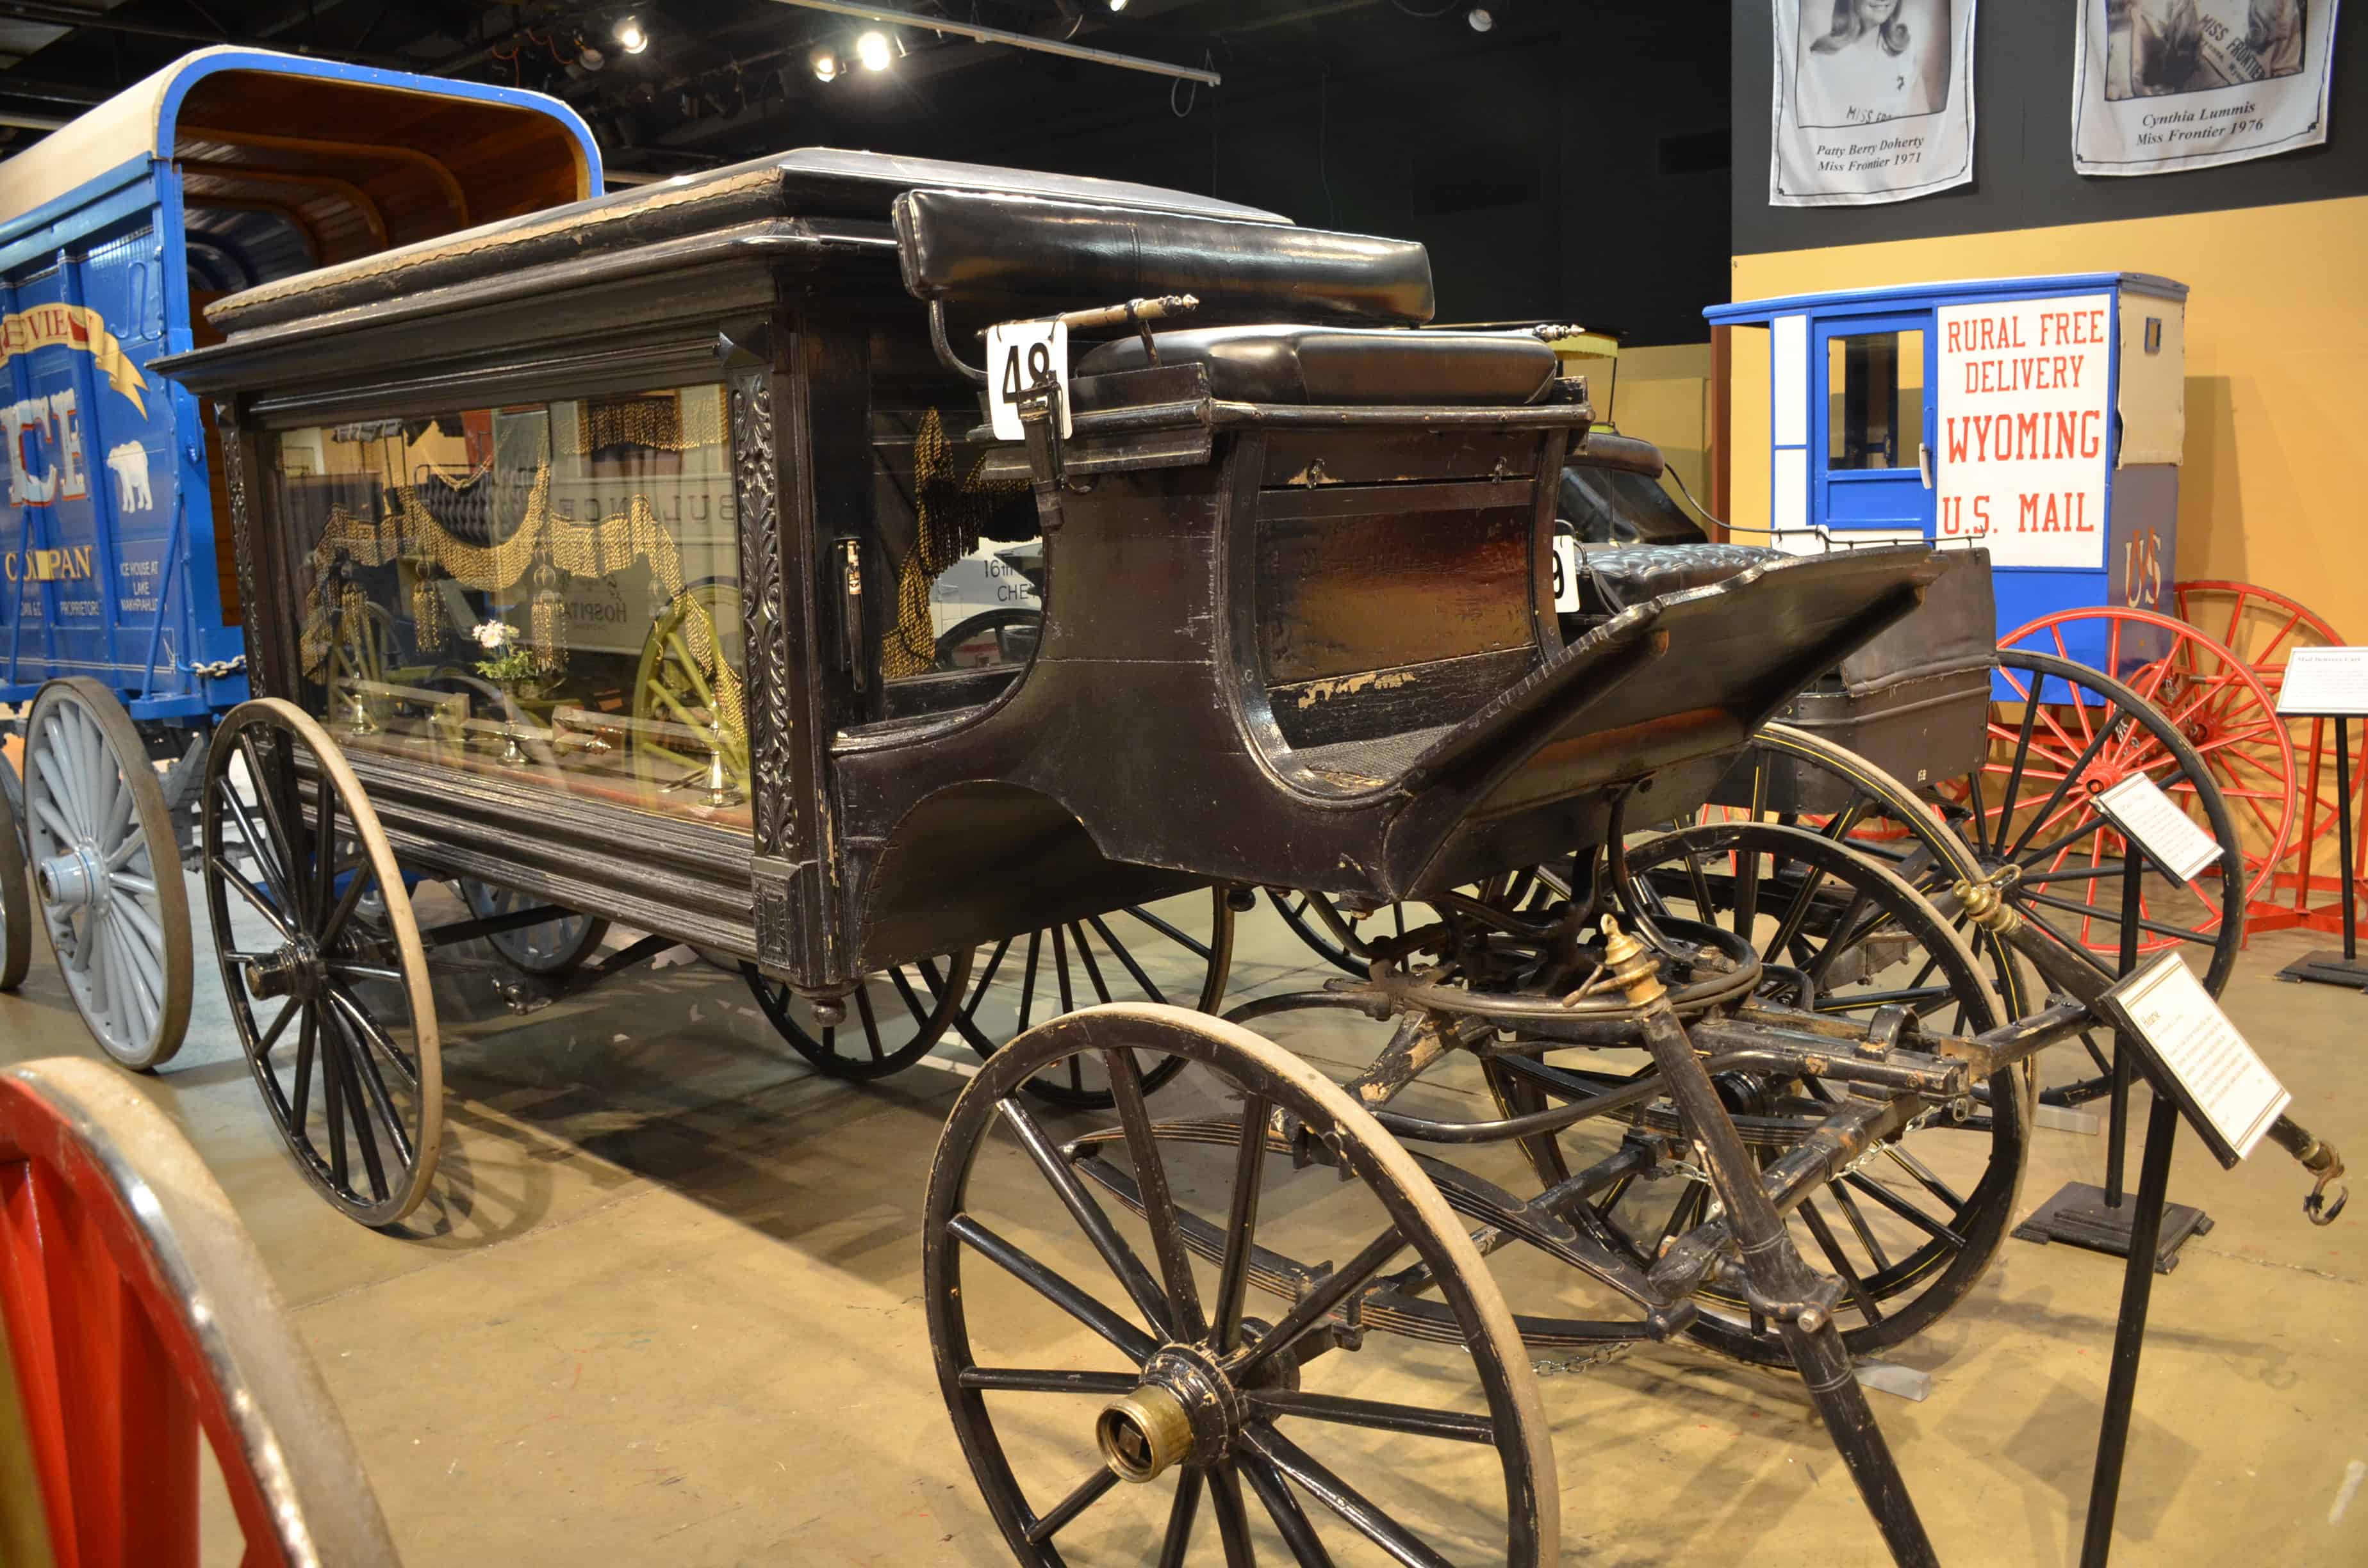 Funeral carriage at the Cheyenne Frontier Days Old West Museum in Wyoming